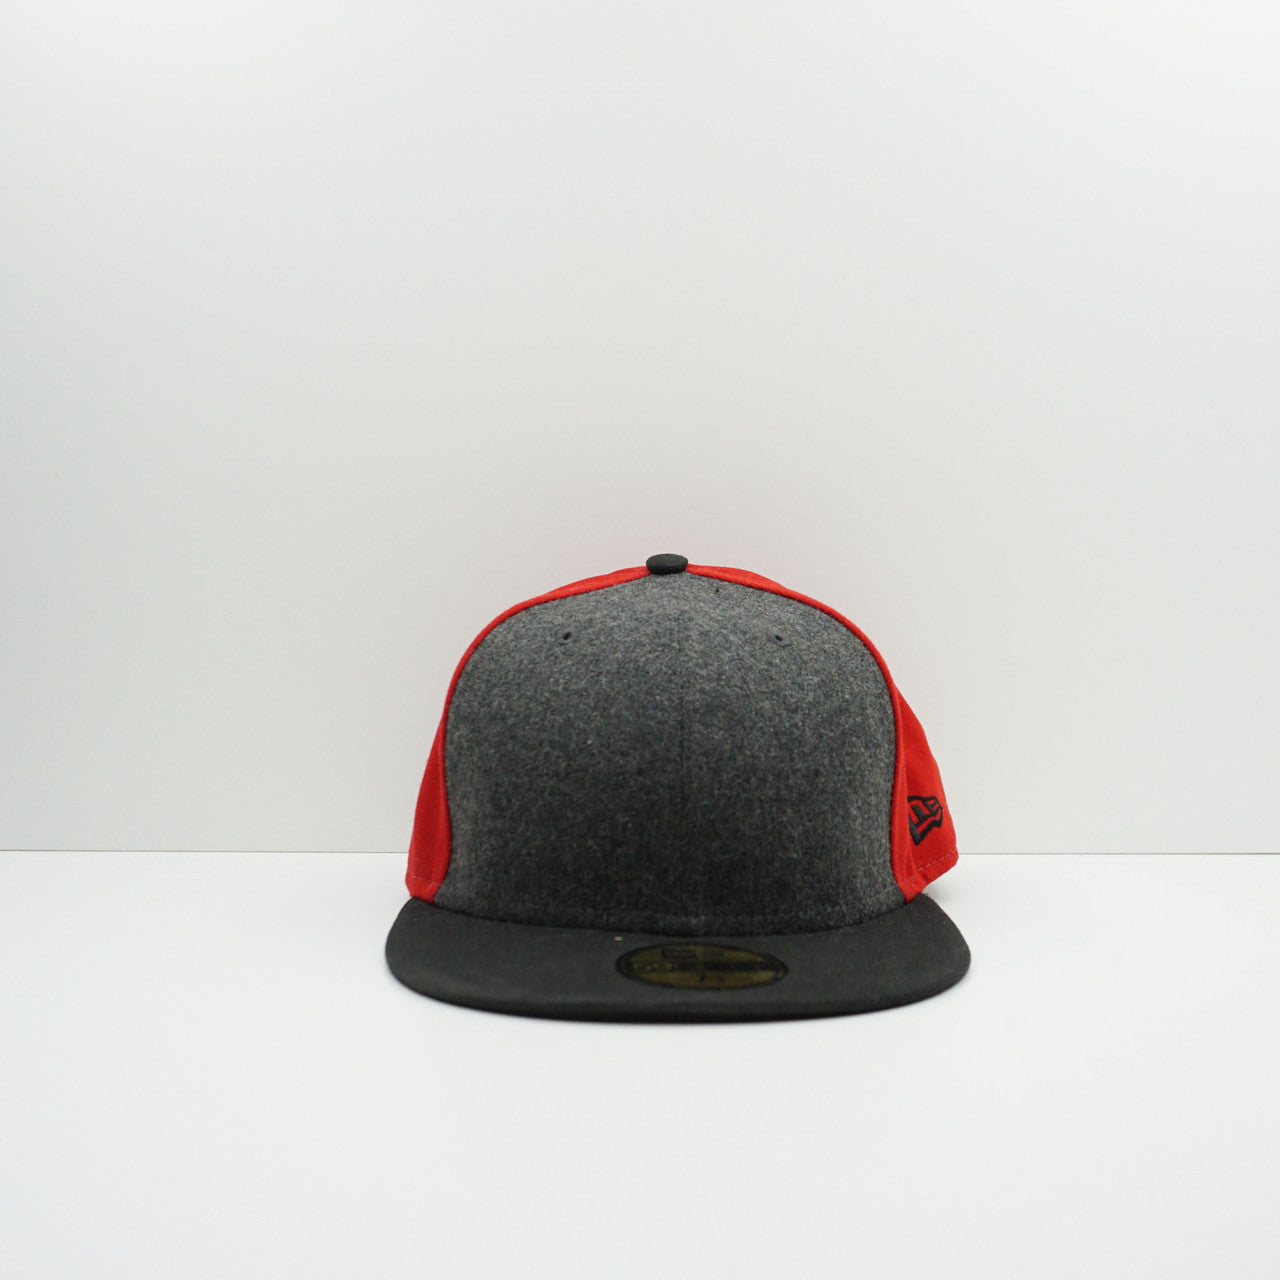 New Era Red/Grey Fitted Cap